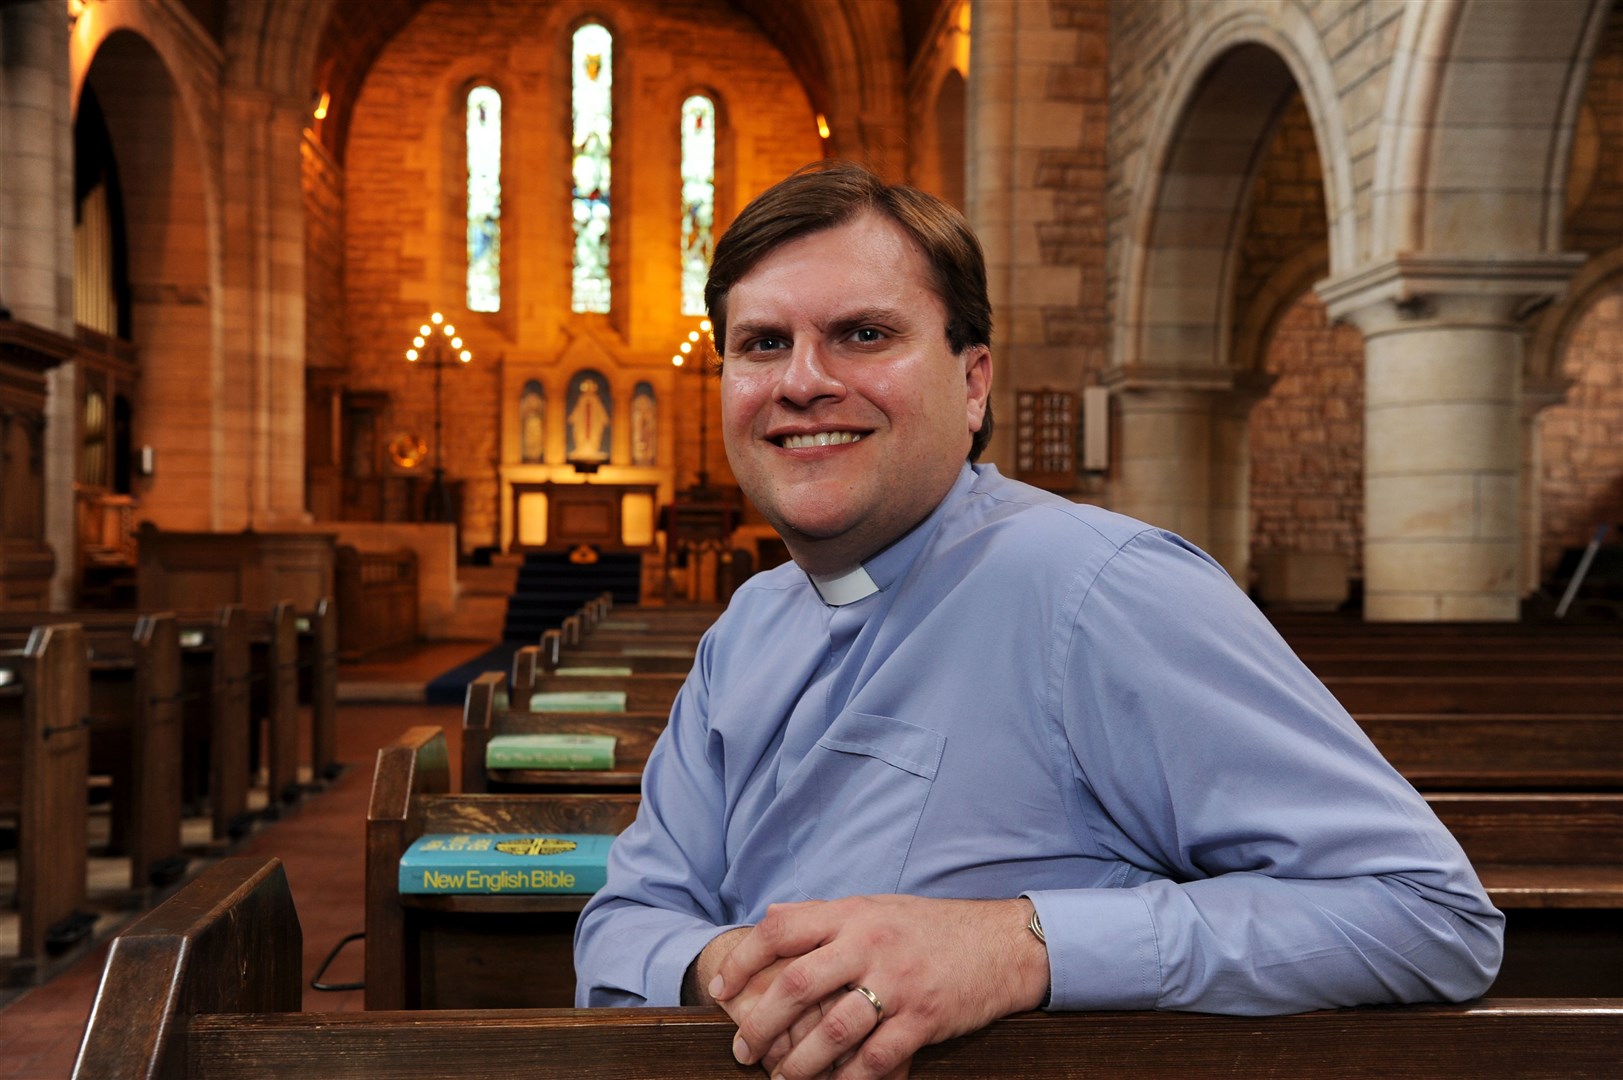 Reverend Deon Oelofse described the participatory budget process as a journey of discovery for himself and the church congregation.